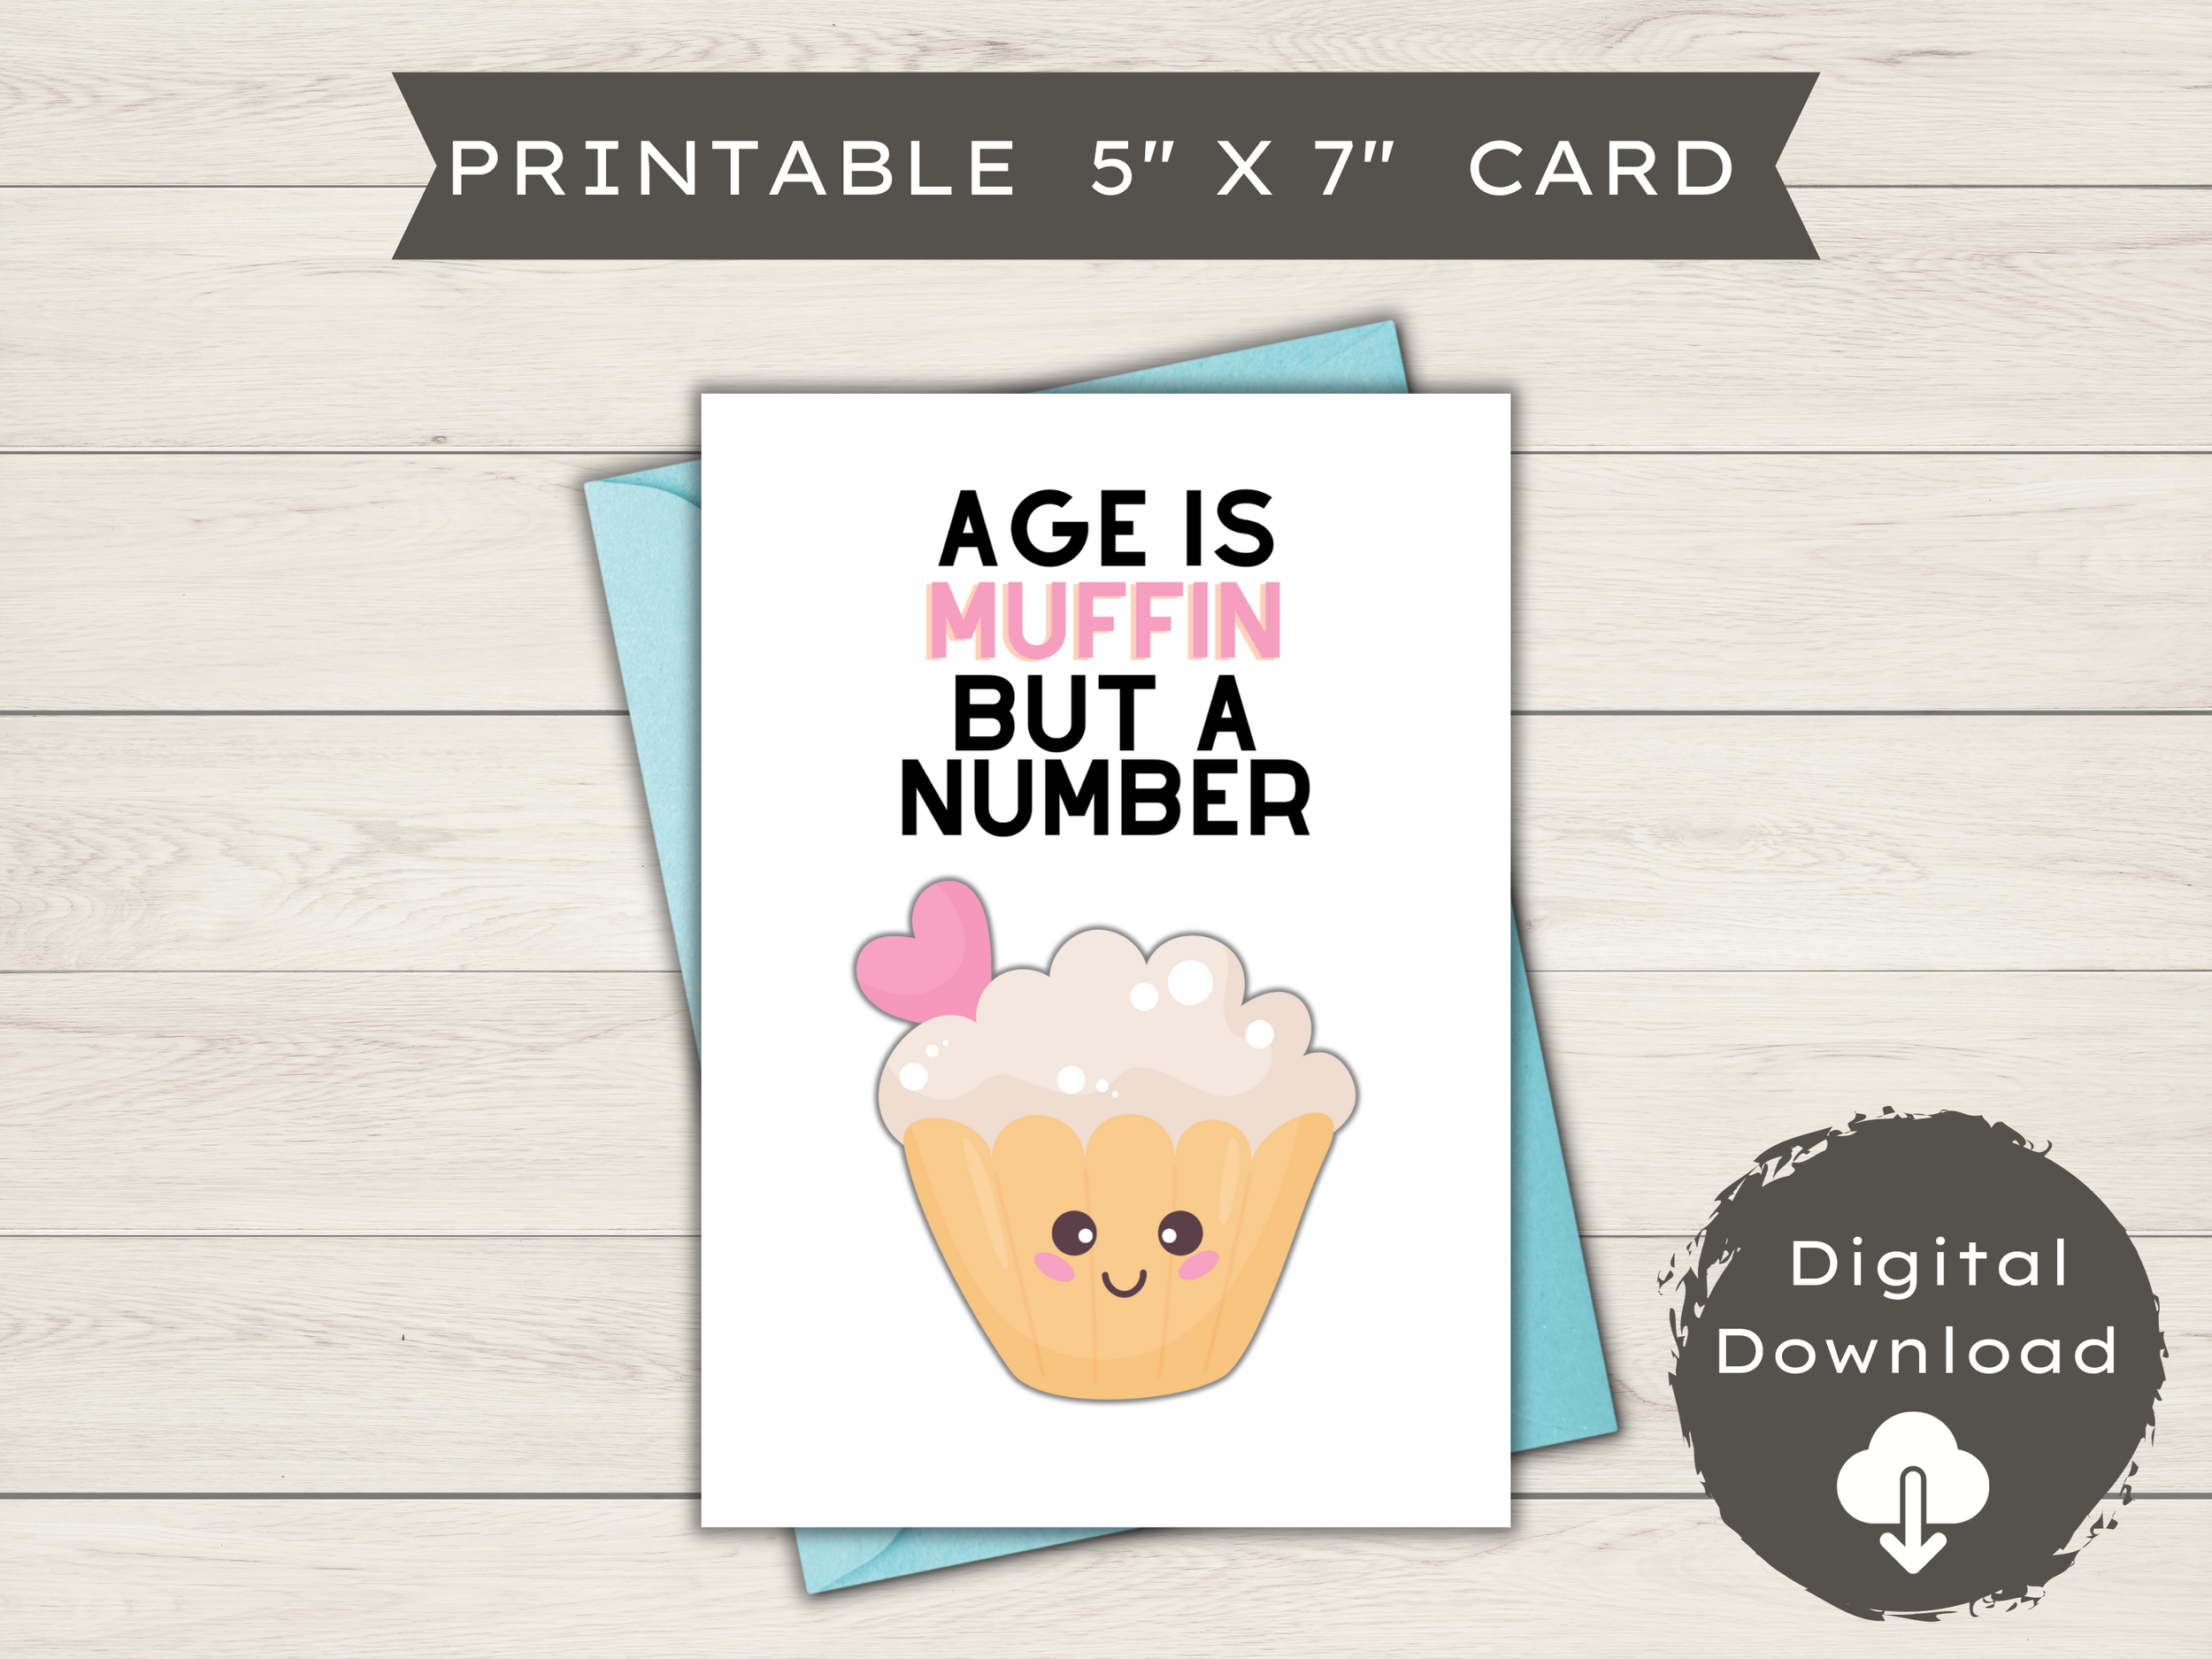 Printable Birthday Card - Age is Muffin but a Number